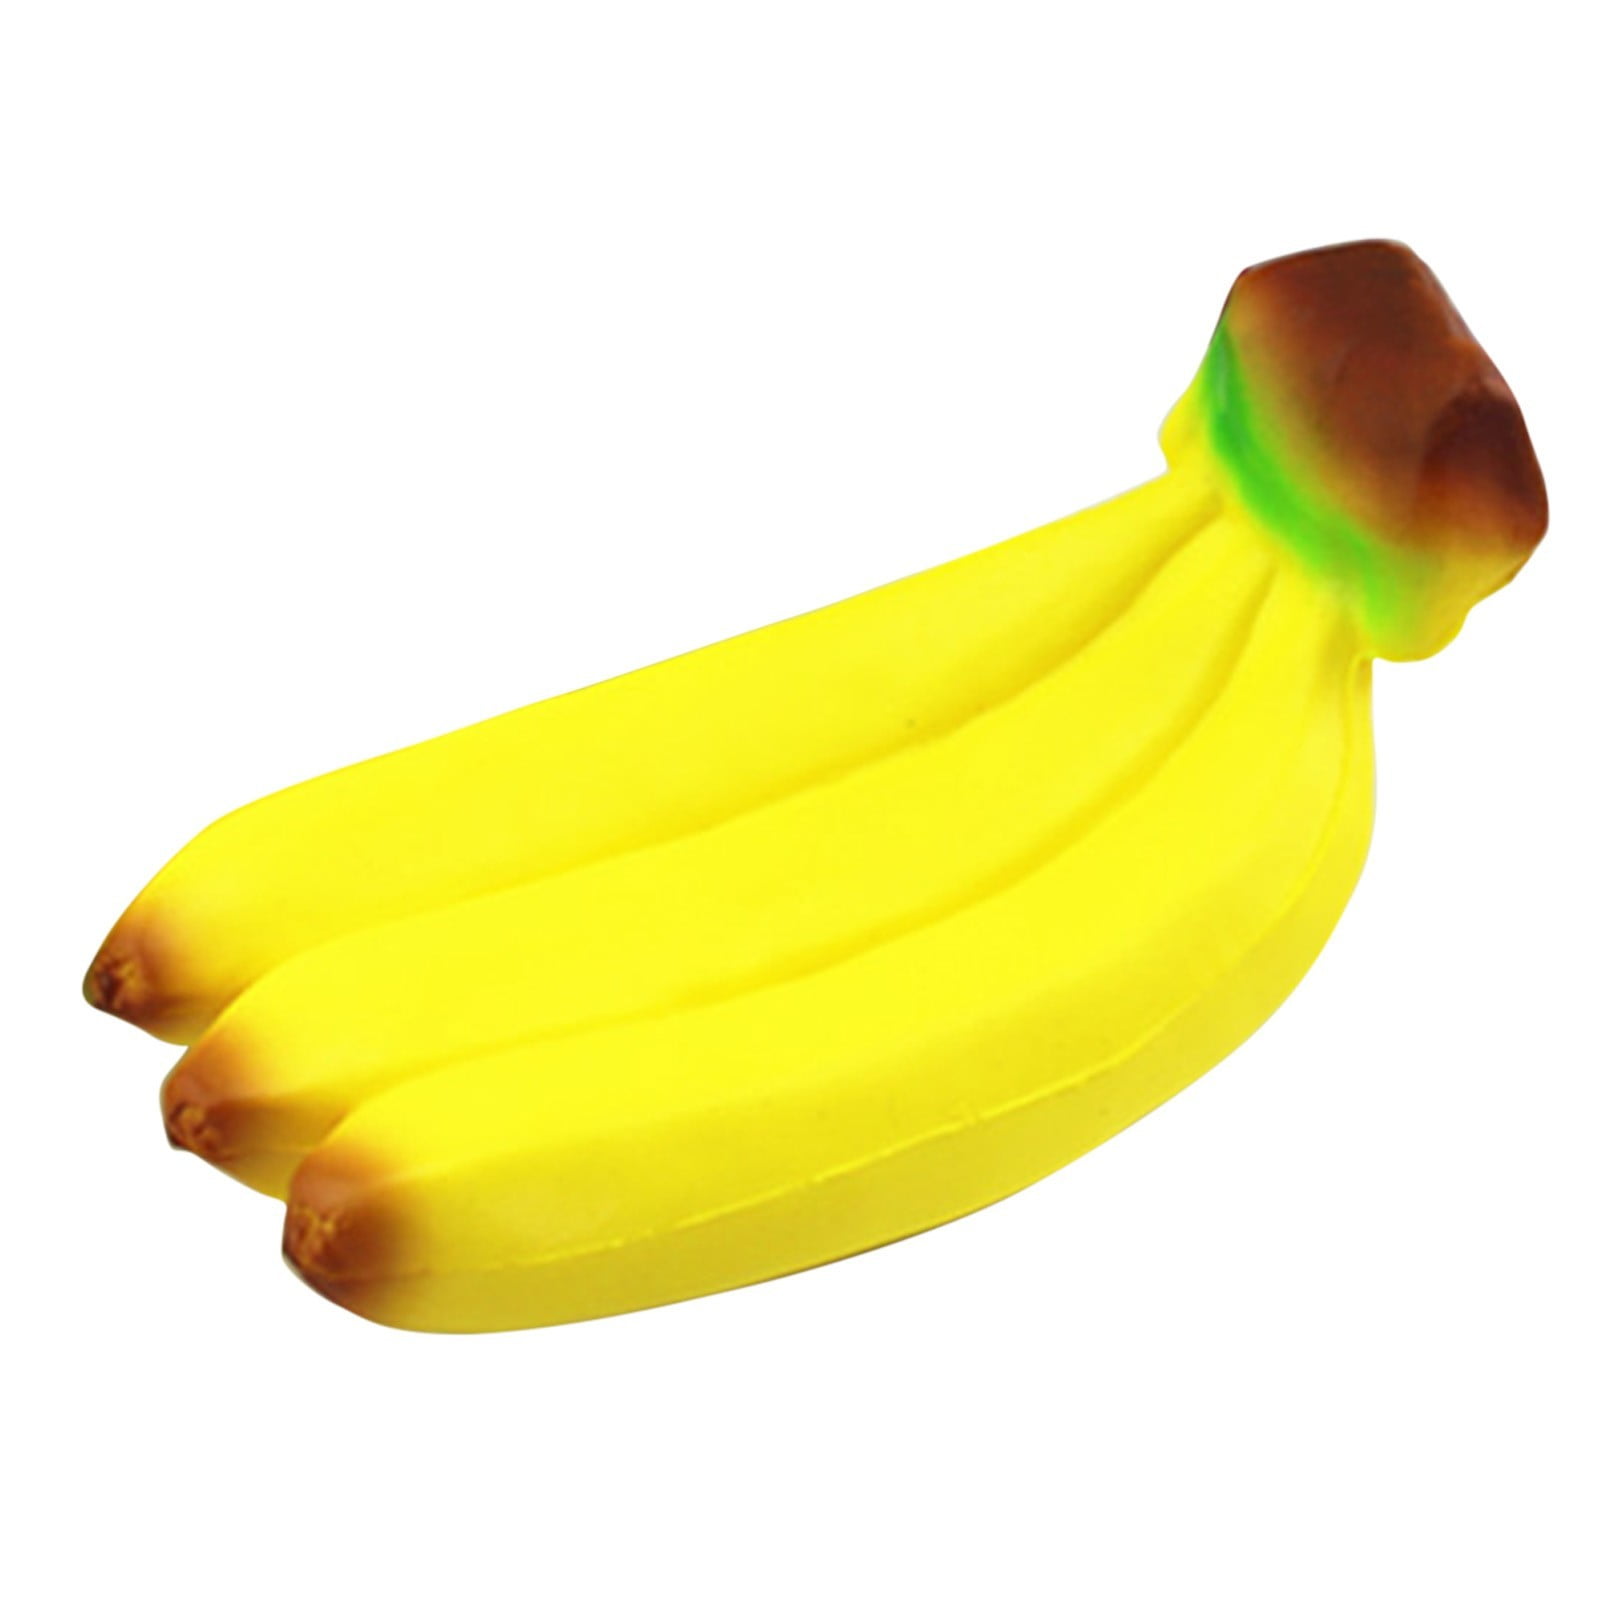 Peas and pies gags on a banana